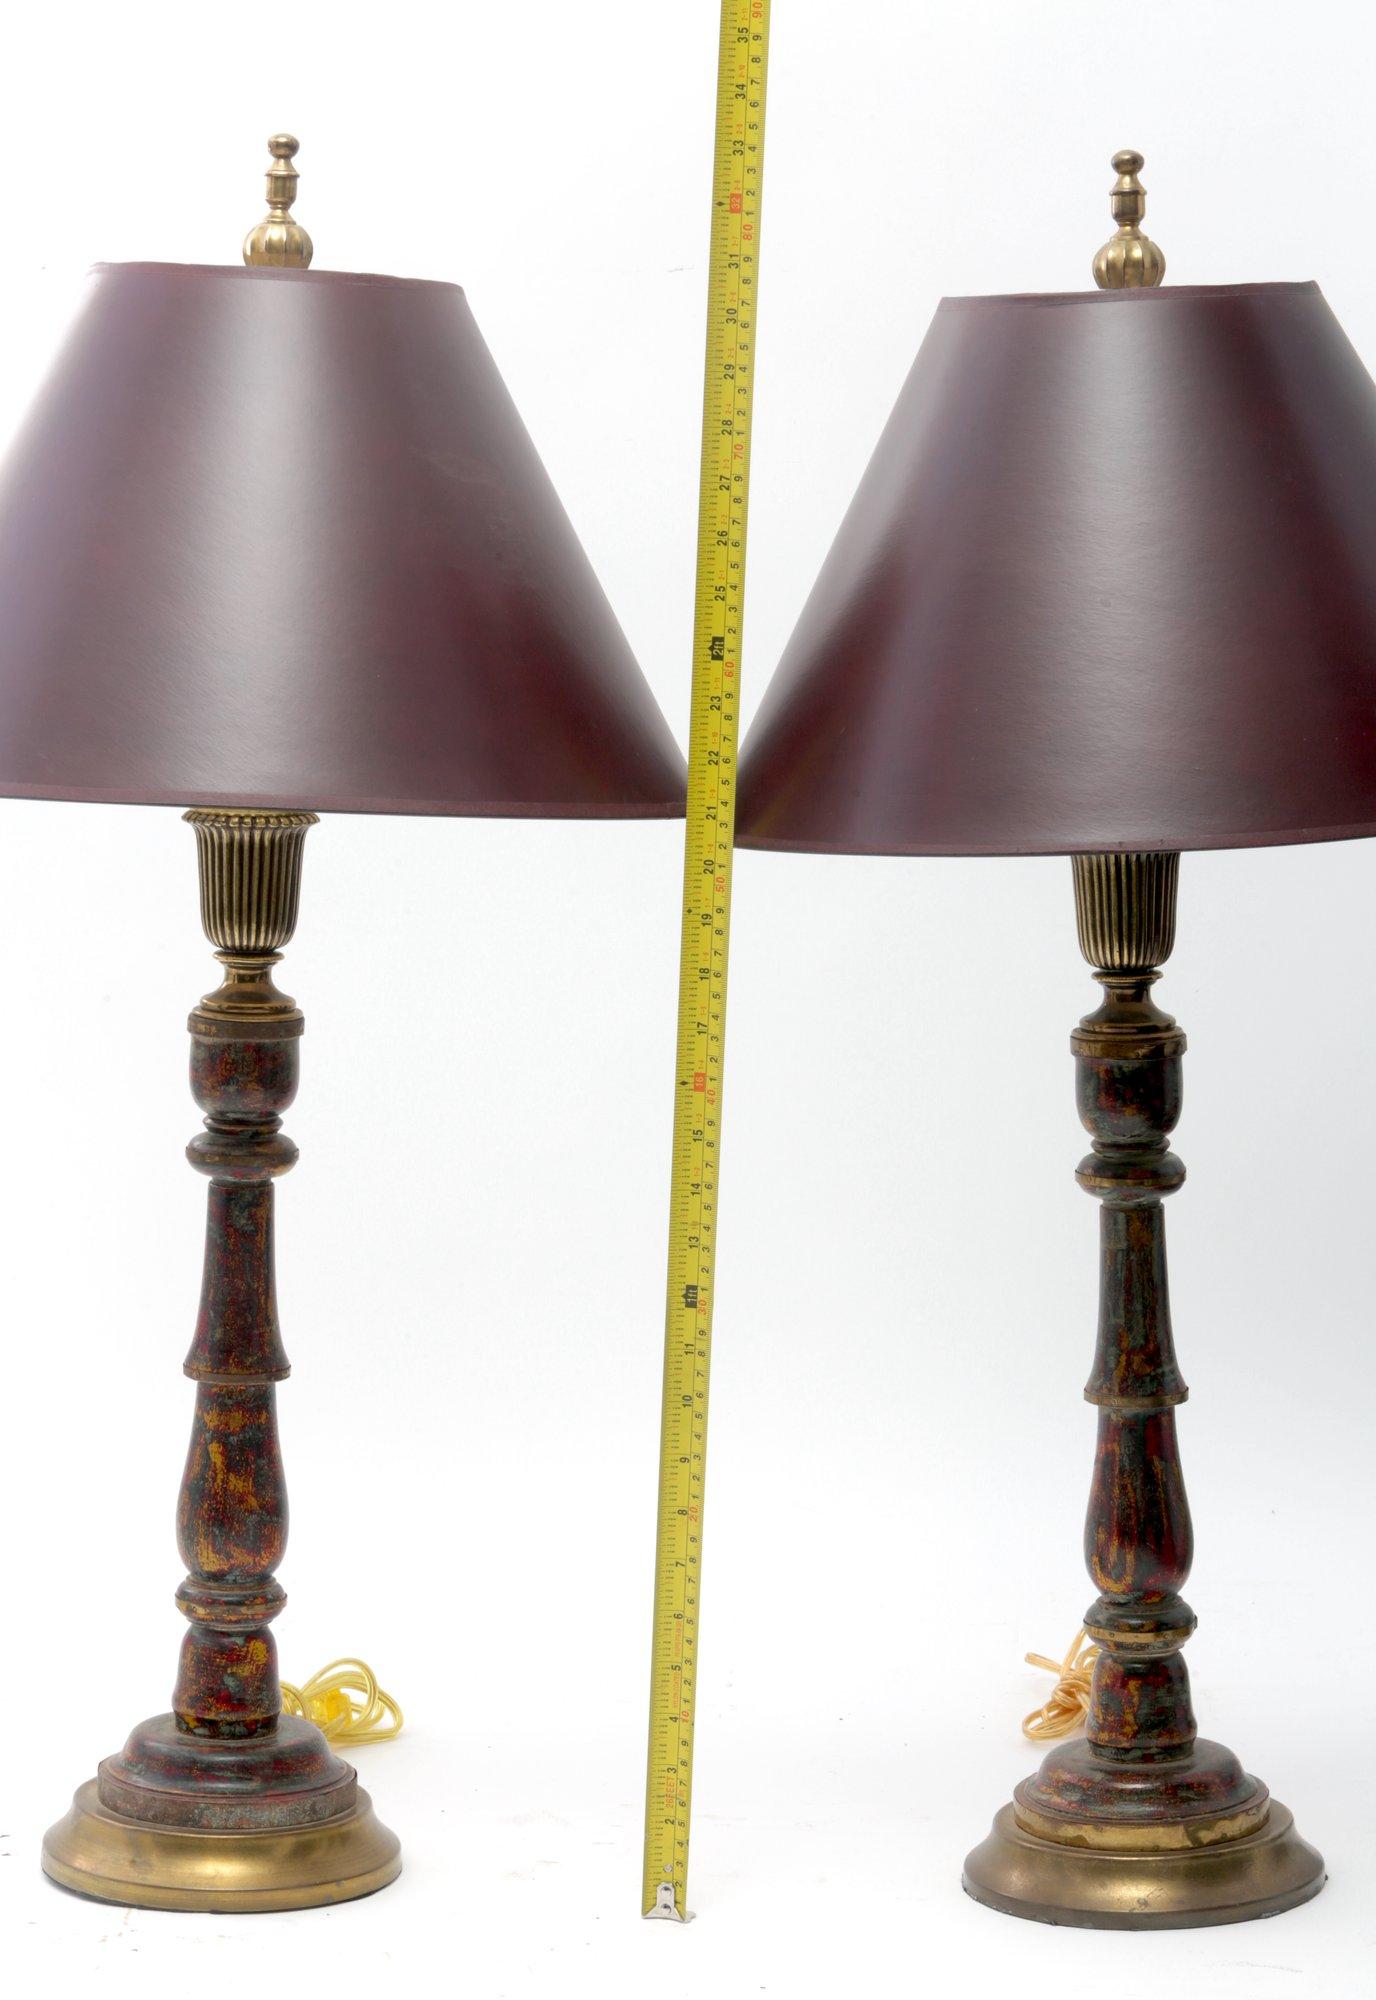 Pair Of Wooden Table Lamps With Brown Shades